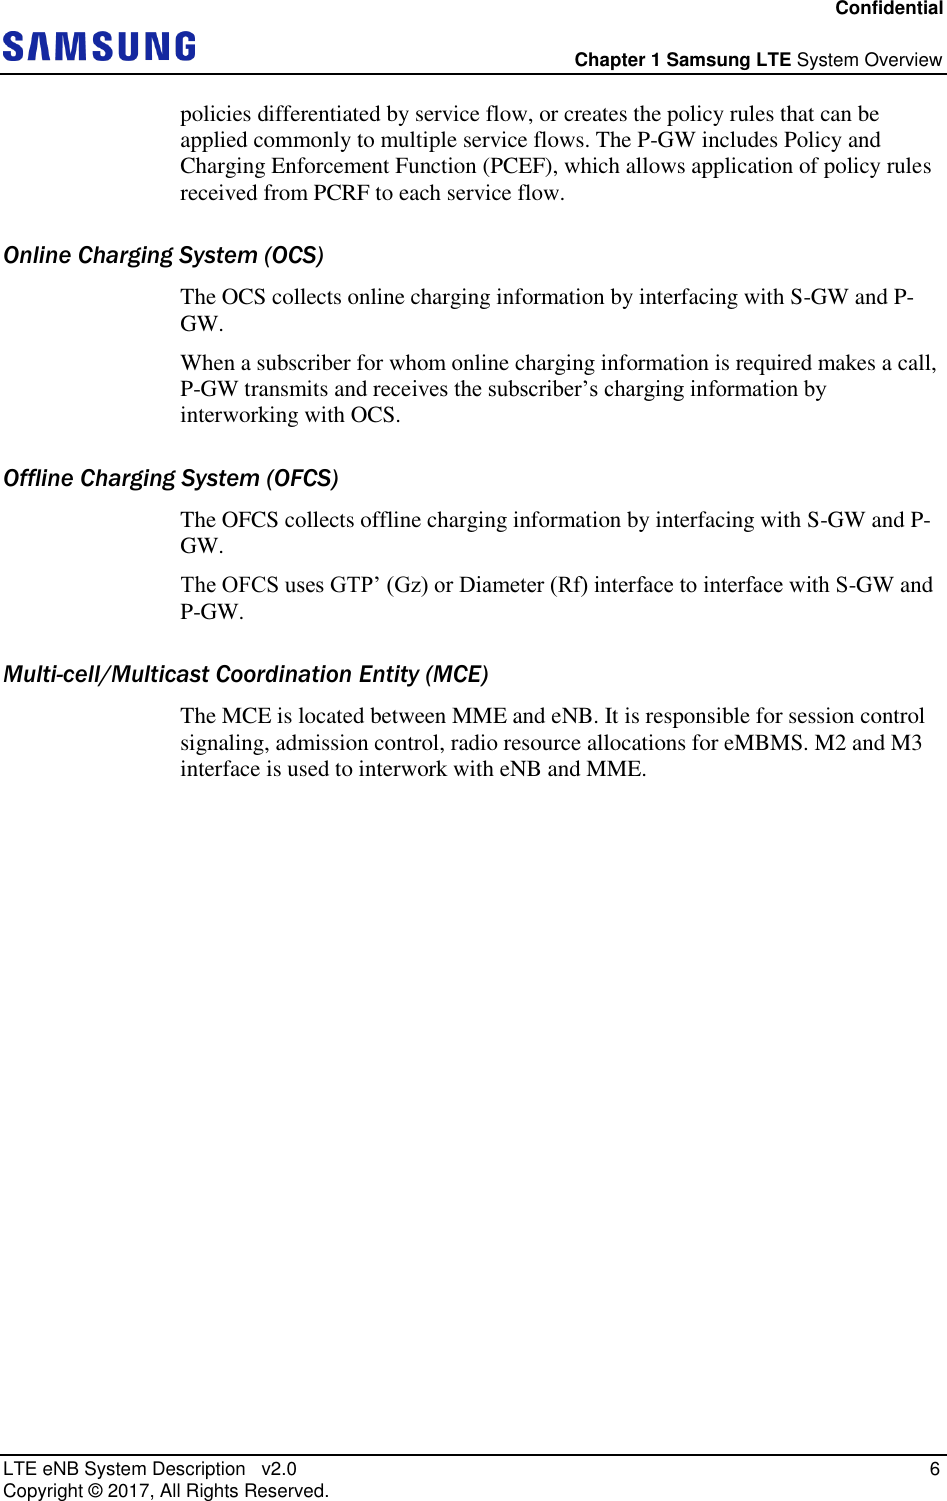 Confidential  Chapter 1 Samsung LTE System Overview LTE eNB System Description   v2.0    6 Copyright ©  2017, All Rights Reserved. policies differentiated by service flow, or creates the policy rules that can be applied commonly to multiple service flows. The P-GW includes Policy and Charging Enforcement Function (PCEF), which allows application of policy rules received from PCRF to each service flow. Online Charging System (OCS) The OCS collects online charging information by interfacing with S-GW and P-GW. When a subscriber for whom online charging information is required makes a call, P-GW transmits and receives the subscriber’s charging information by interworking with OCS. Offline Charging System (OFCS) The OFCS collects offline charging information by interfacing with S-GW and P-GW. The OFCS uses GTP’ (Gz) or Diameter (Rf) interface to interface with S-GW and P-GW. Multi-cell/Multicast Coordination Entity (MCE)  The MCE is located between MME and eNB. It is responsible for session control signaling, admission control, radio resource allocations for eMBMS. M2 and M3 interface is used to interwork with eNB and MME.     